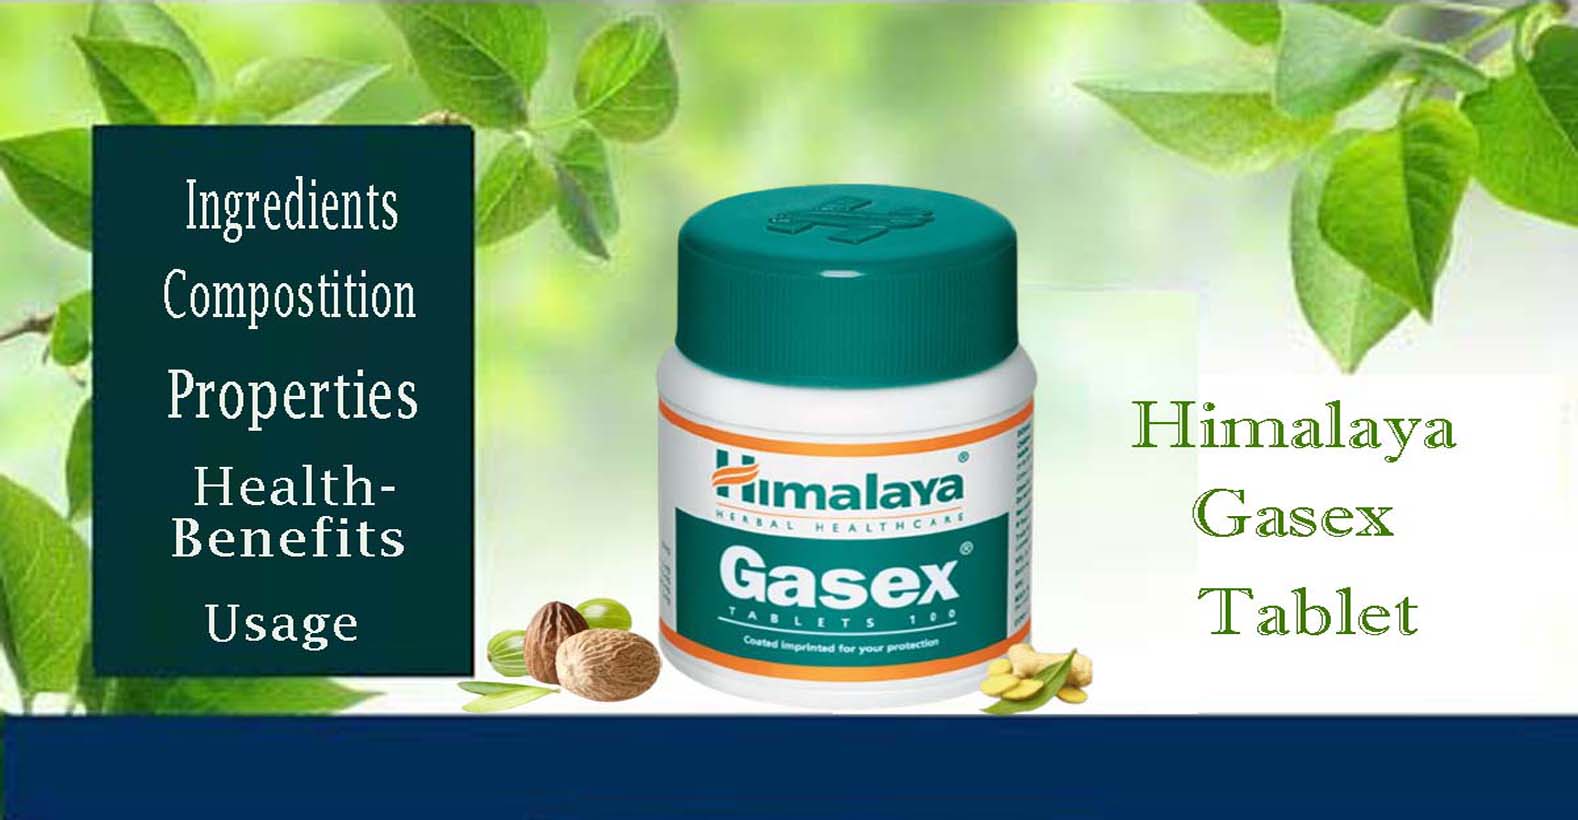 Himalaya Gasex Tablets - Ingredients, Composition, Properties, Health Benefits, Usage